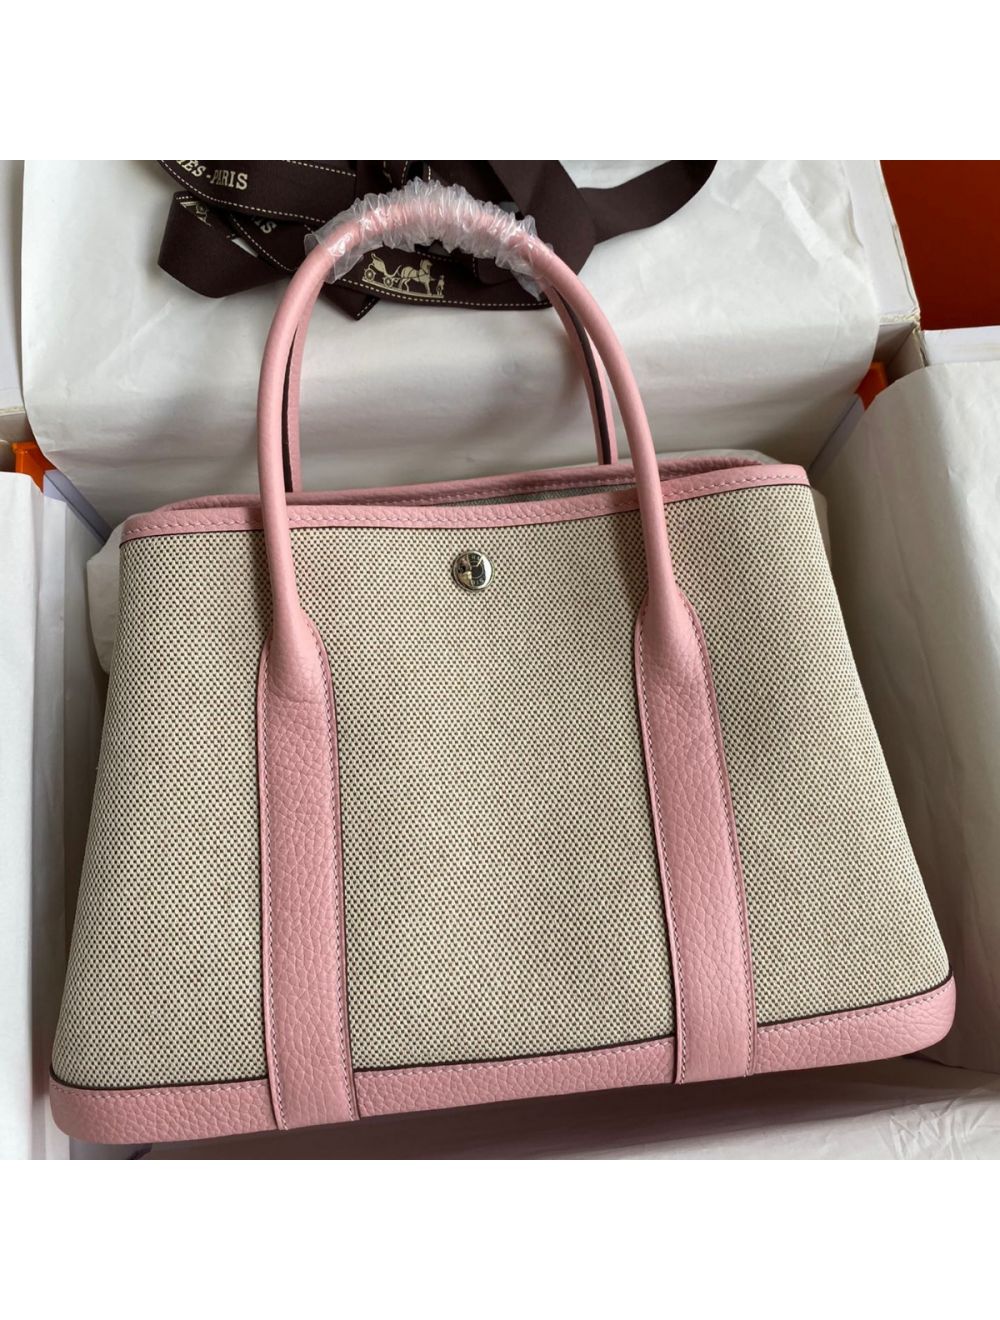 Hermes Garden Party Bag Togo Leather In Pink